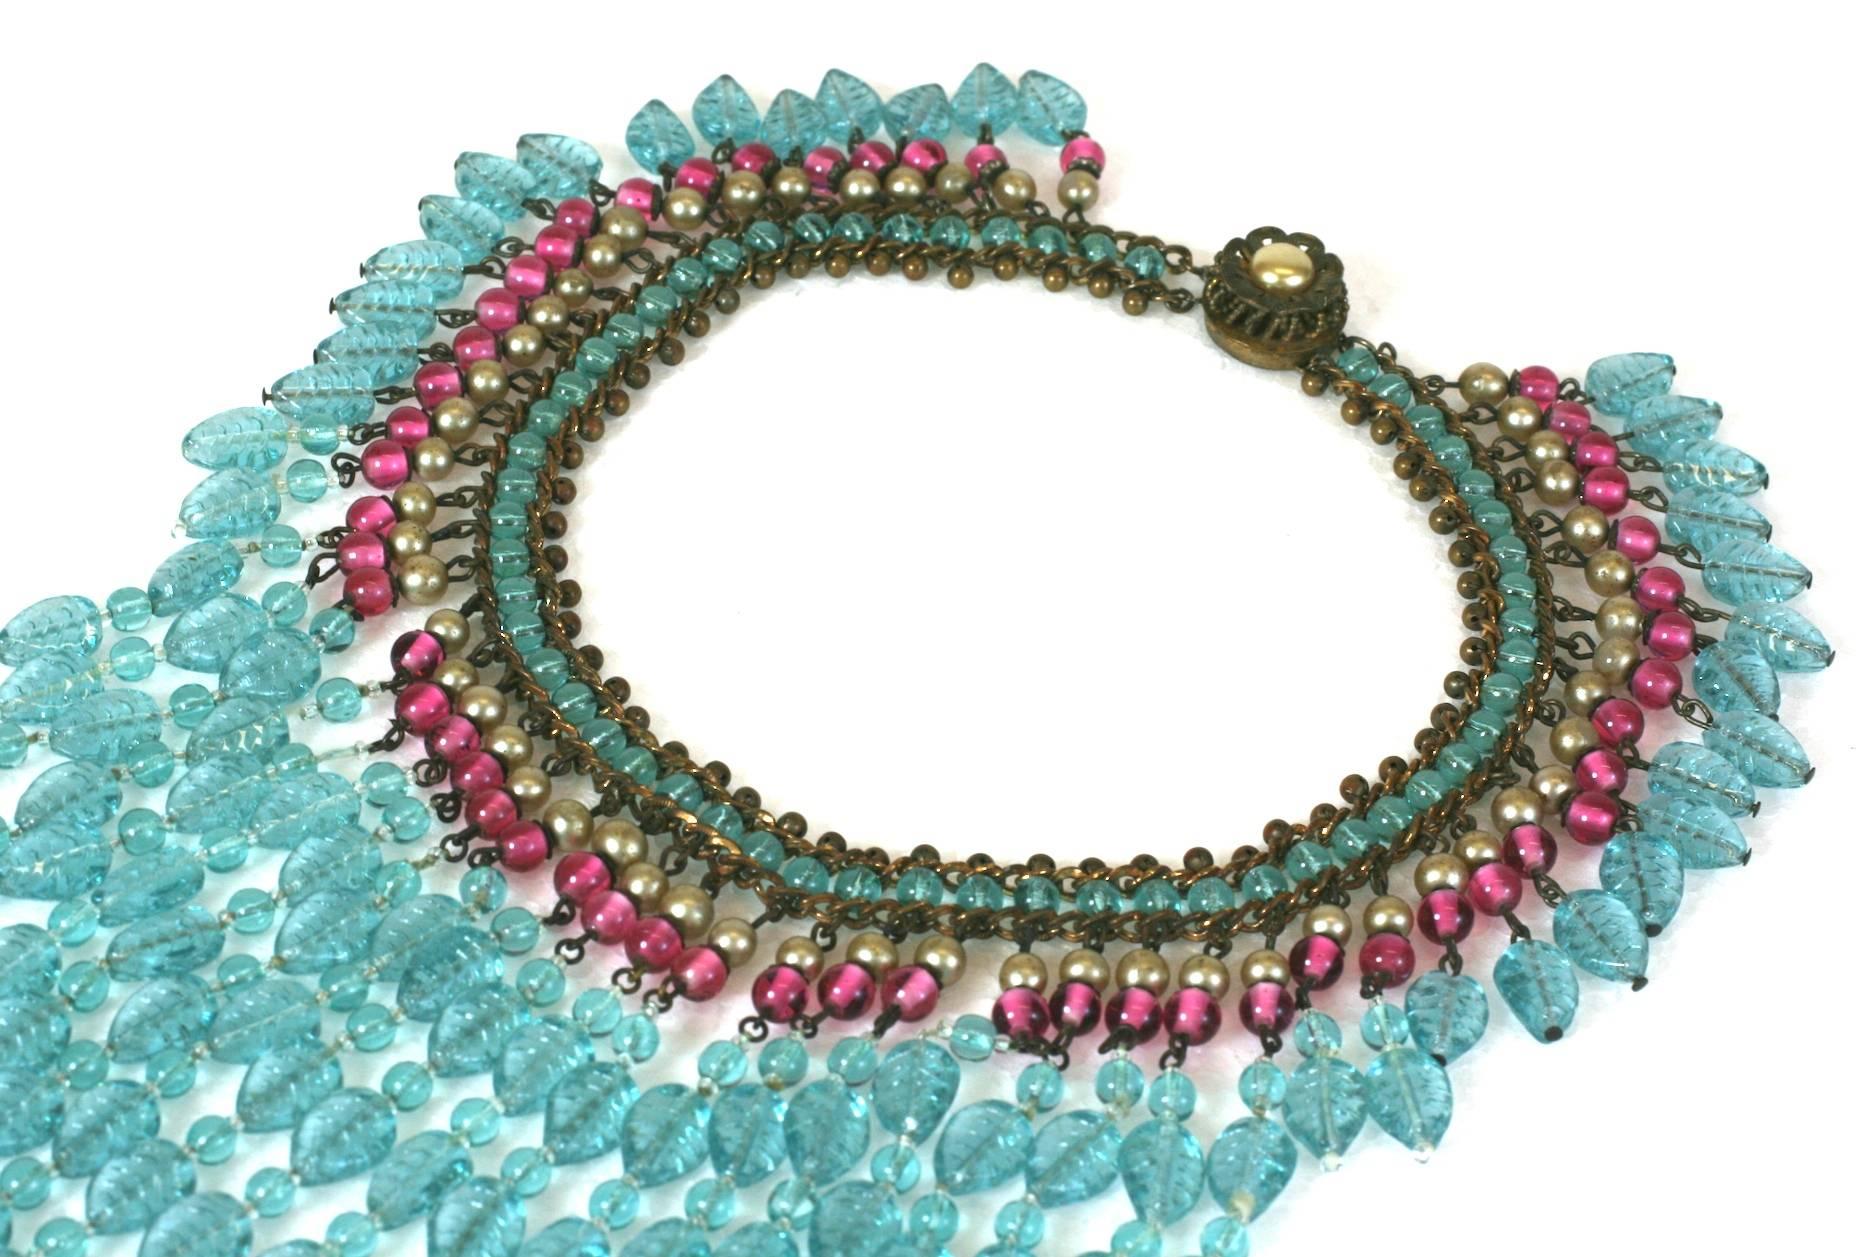 Anglo-Indian Miriam Haskell Early Moghul Bib Necklace